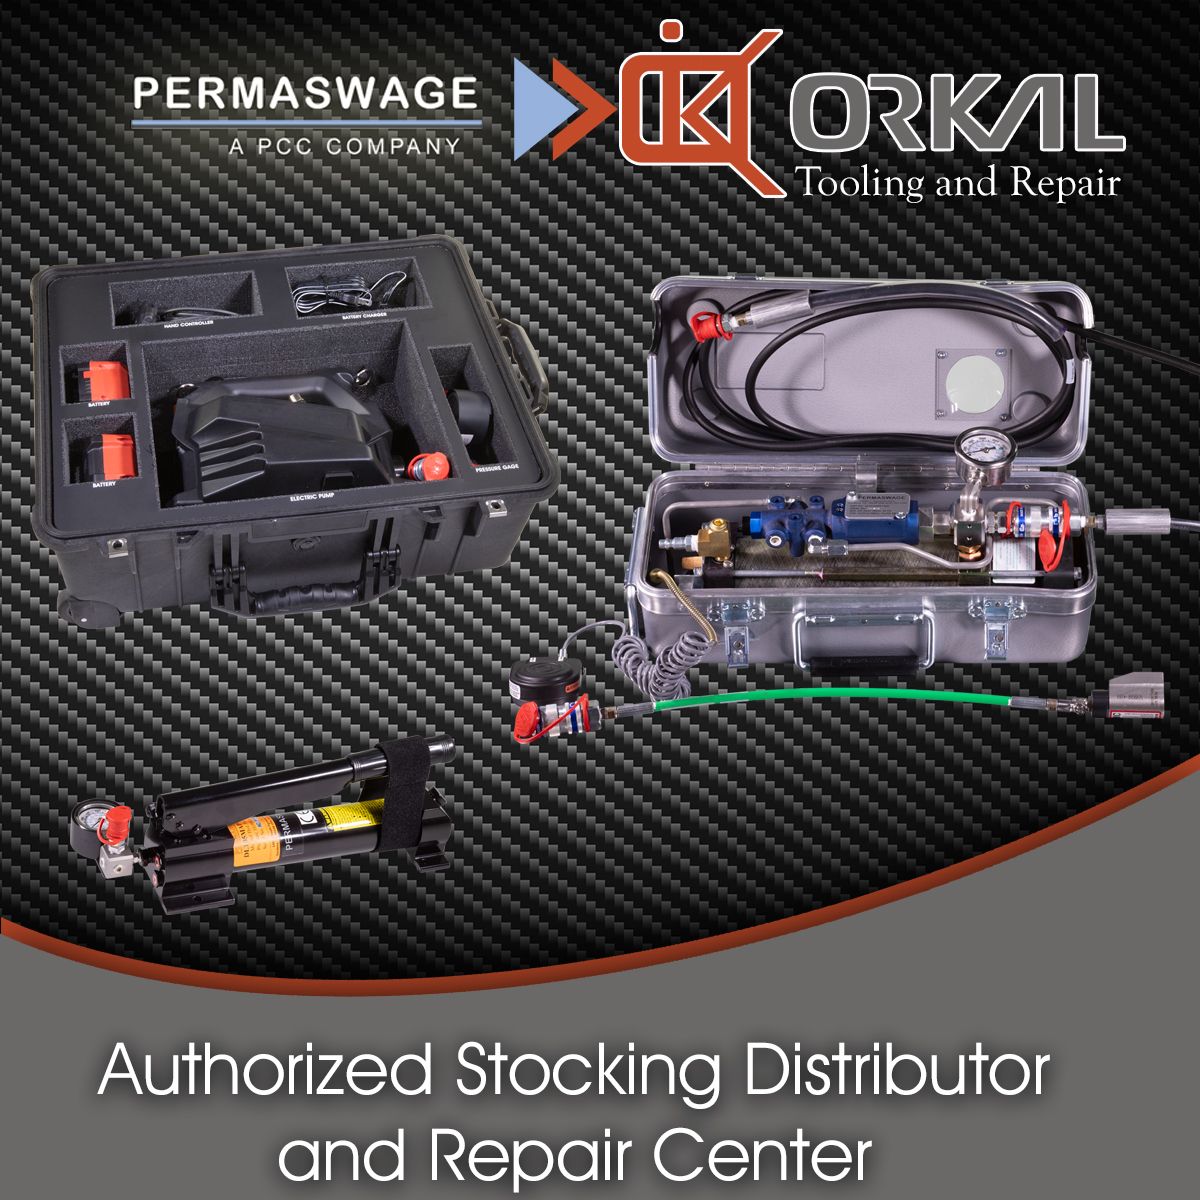 professional toolkits from permaswage and orkal displayed in open cases, emphasizing their role as an authorized auto draft distributor and repair center.